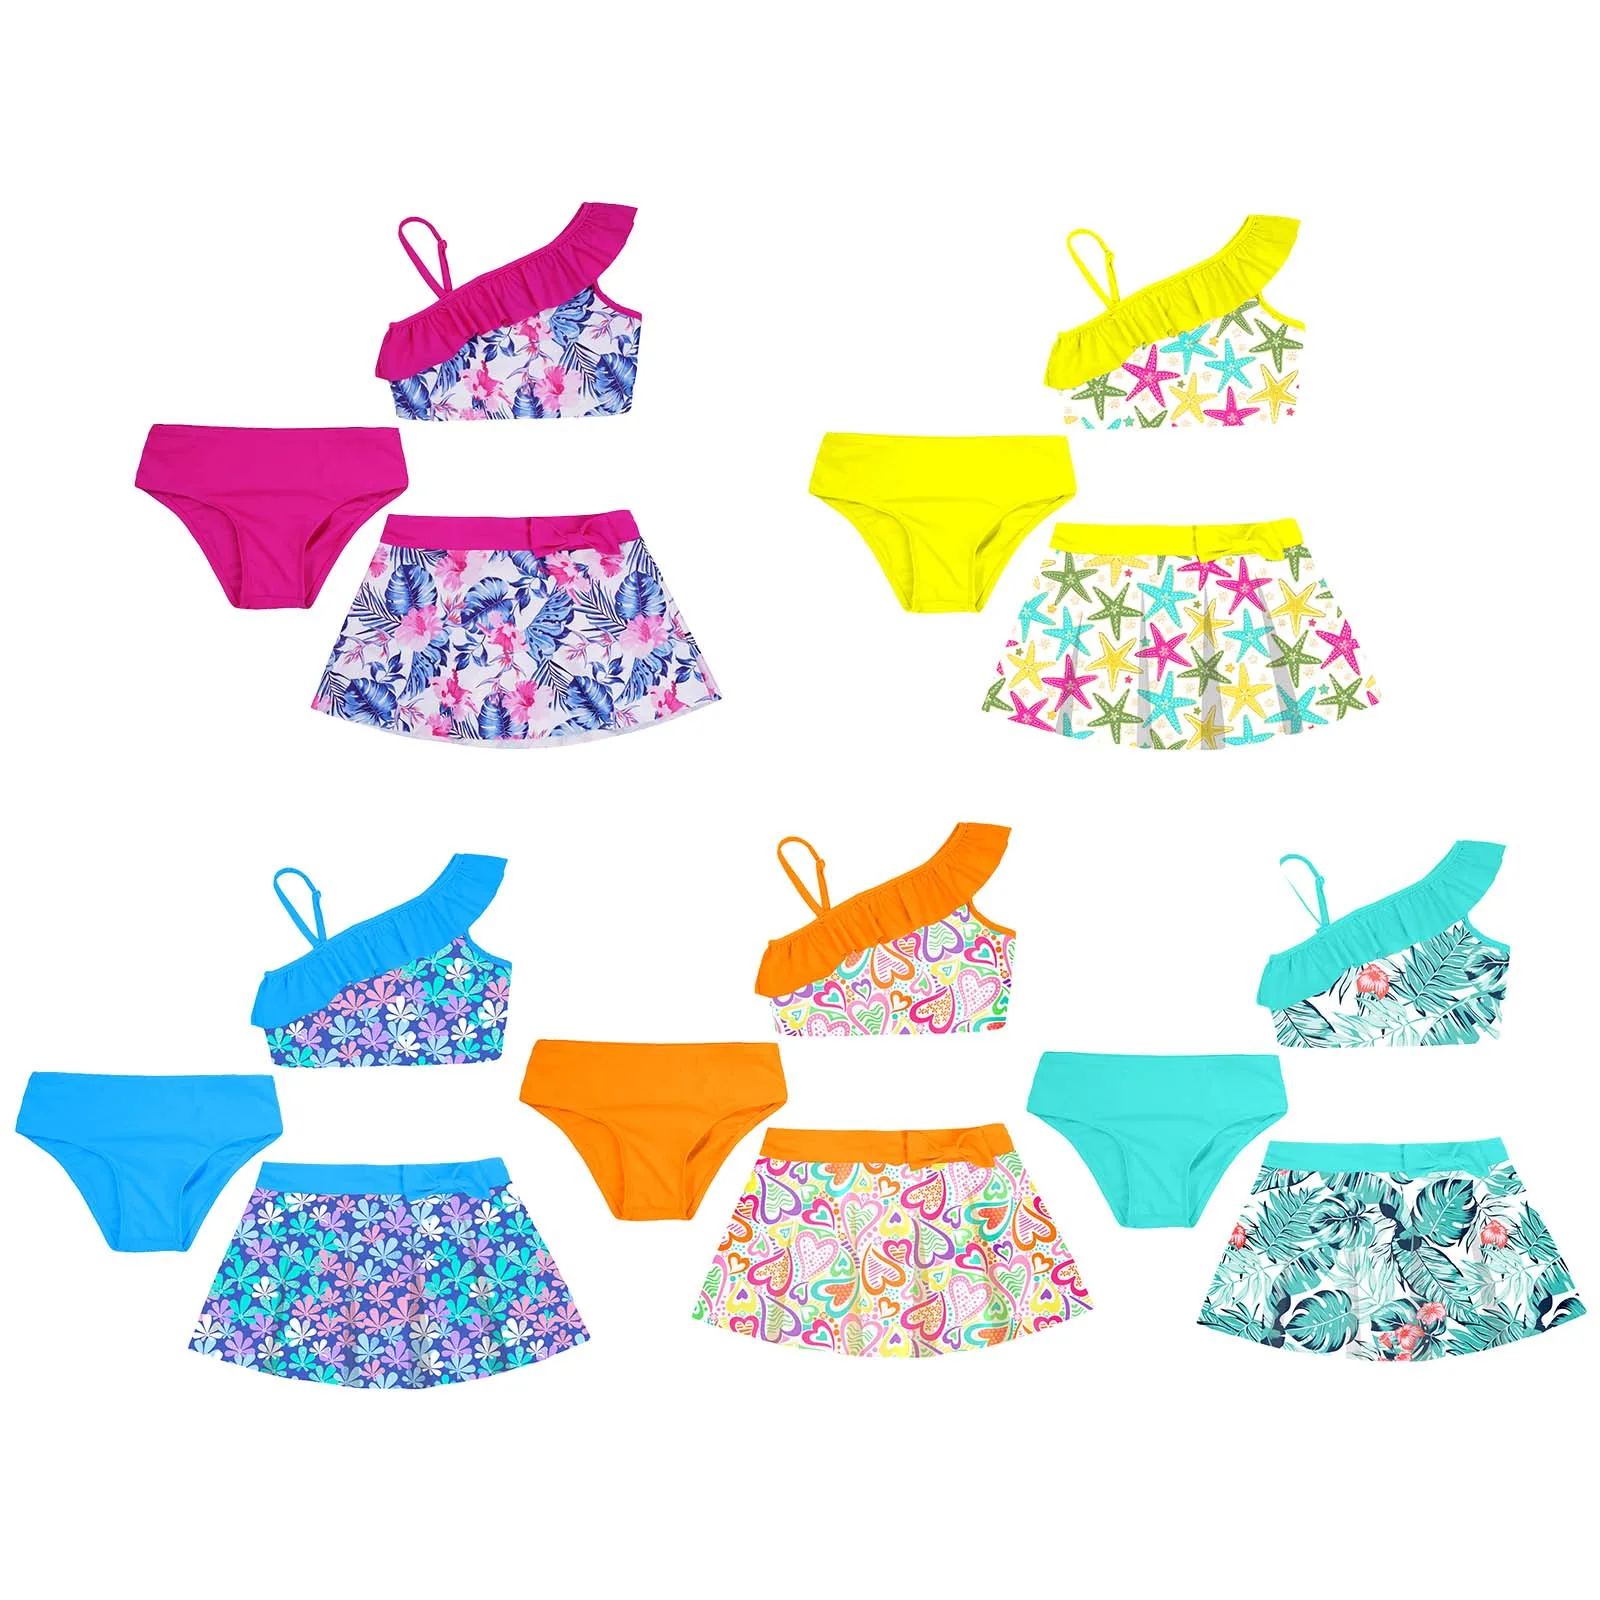 Kids Girls Swimsuits Outfits 3Pcs Floral Oblique Shoulder Ruffle Vest Crop Tops with Bikini Briefs and Skirts Children Swimwear